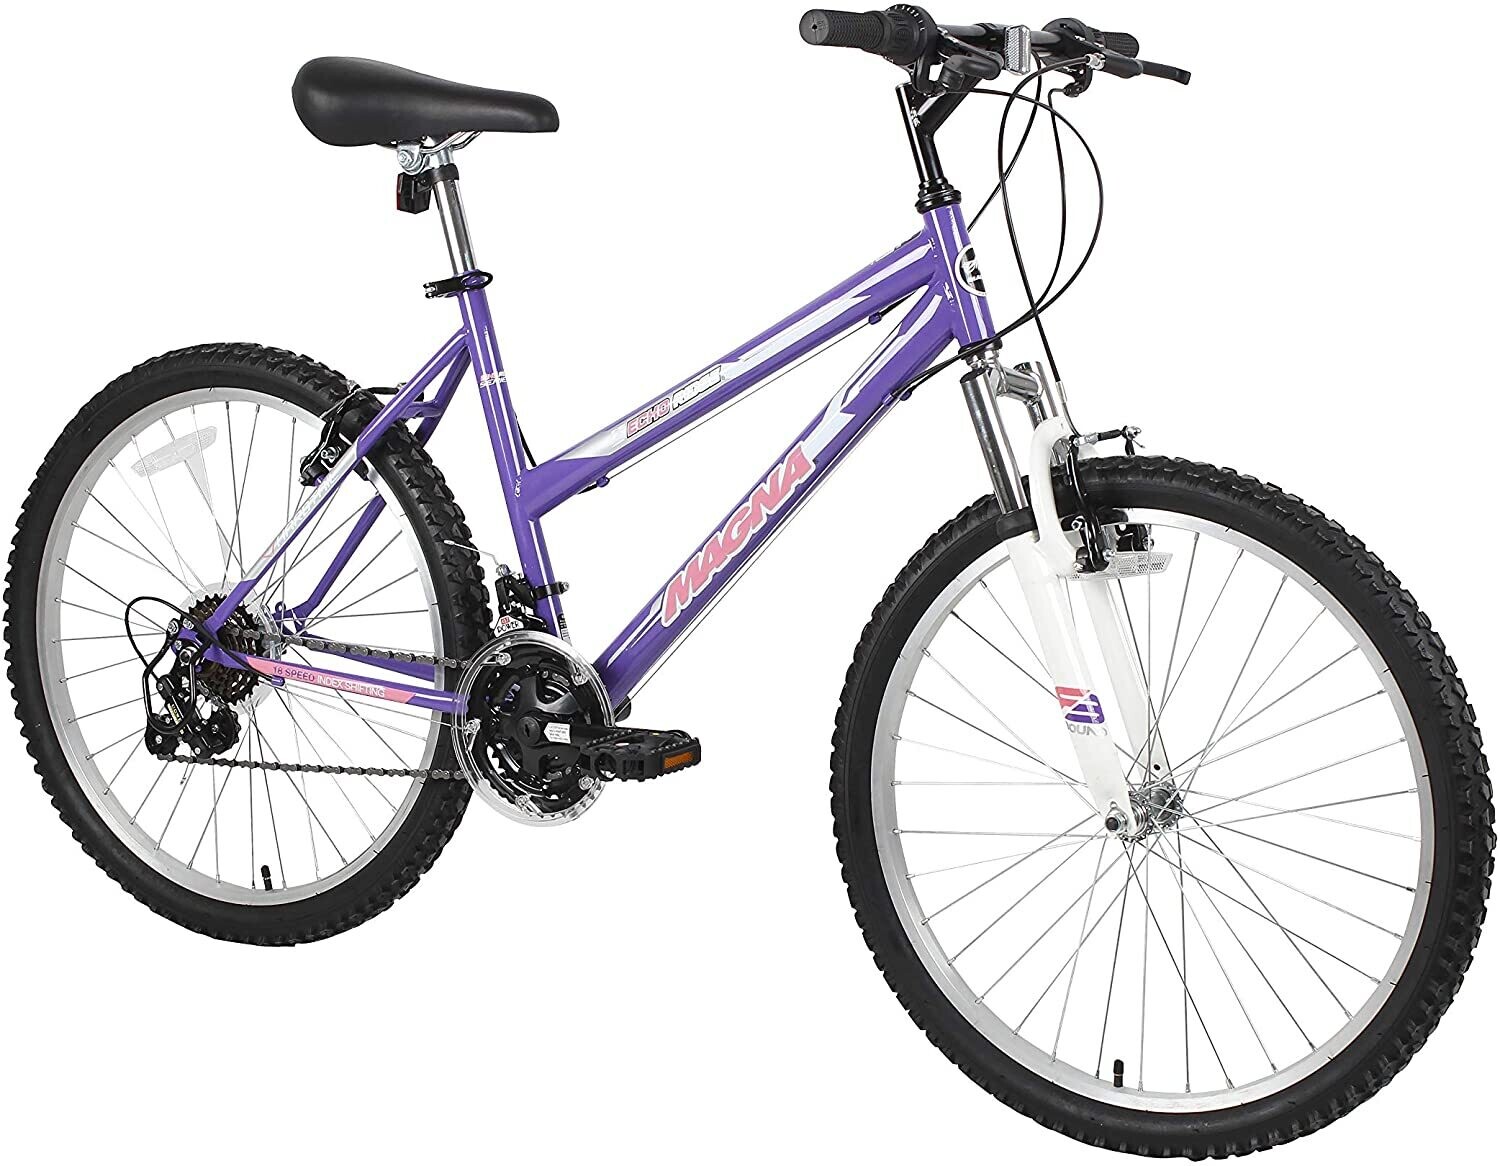 Dynacraft Magna Front Shock Mountain Bike Boys, Girls, Men's and Women's (24 Inch) Wheels with 18 Speed Grip Shifter and Dual Handbrakes in Red, Purple